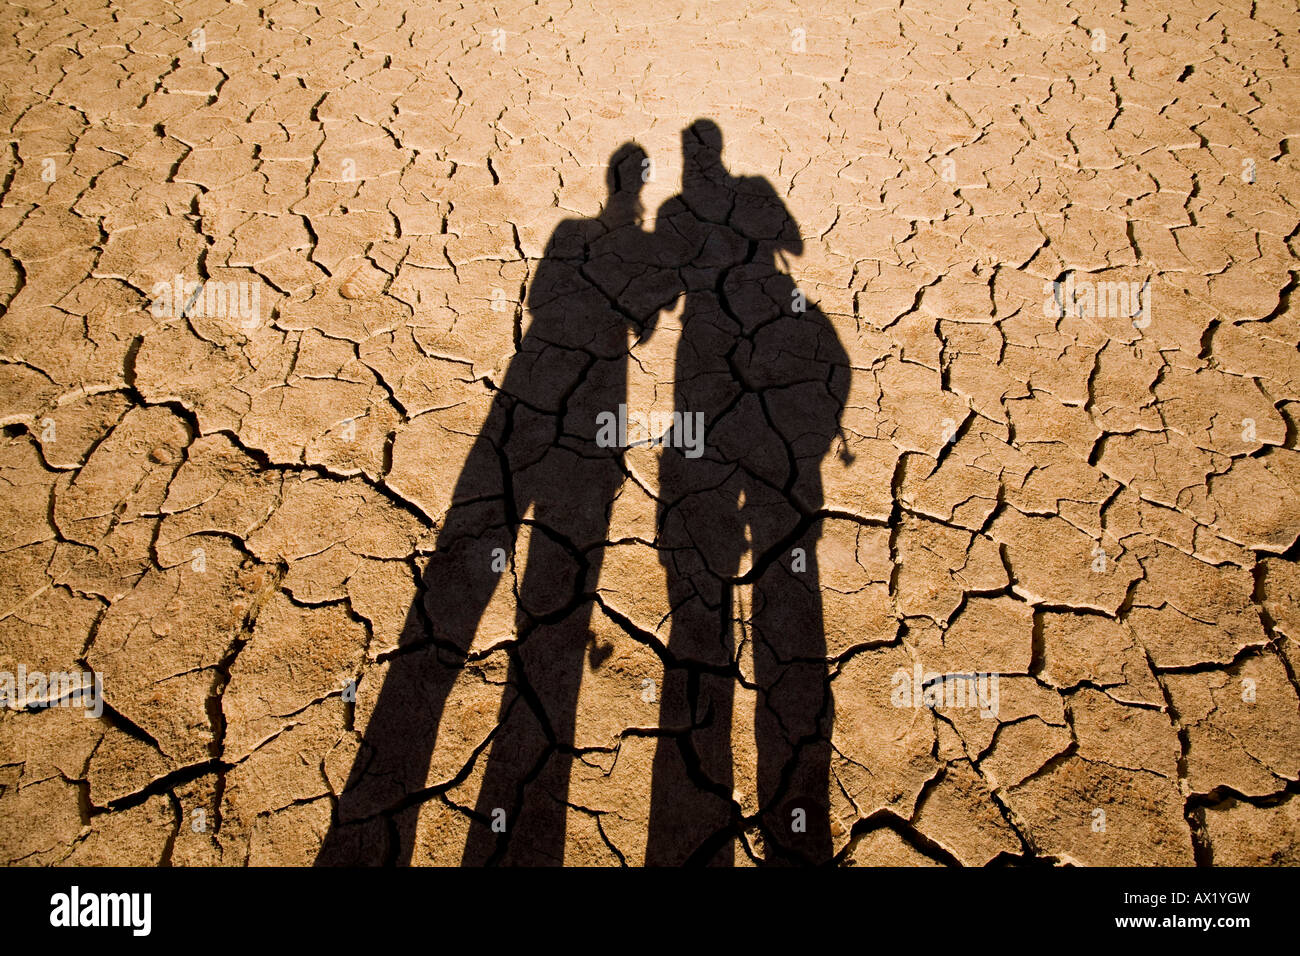 Parched earth and shadows, Sossusvlei, Namibia, Africa Stock Photo